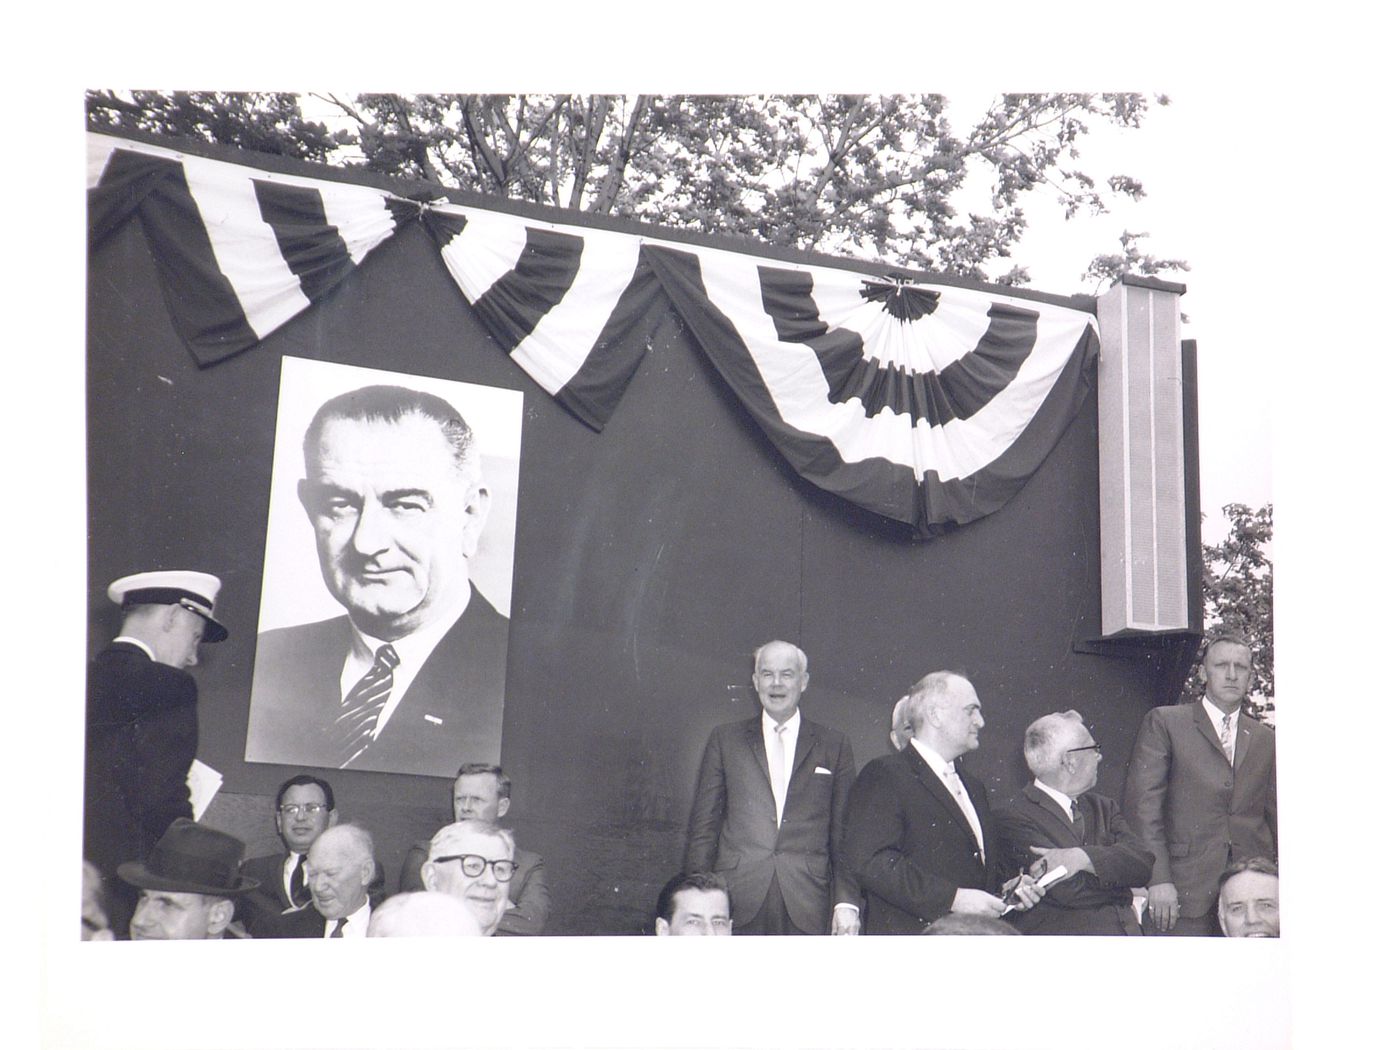 View of the dedication ceremony of the John F. Kennedy Educational, Civic and Cultural Center showing a close-up view of a poster of President Lyndon B. Johnson, a photograph of the model of the building and people on the platform, Mineola, New York, Unit